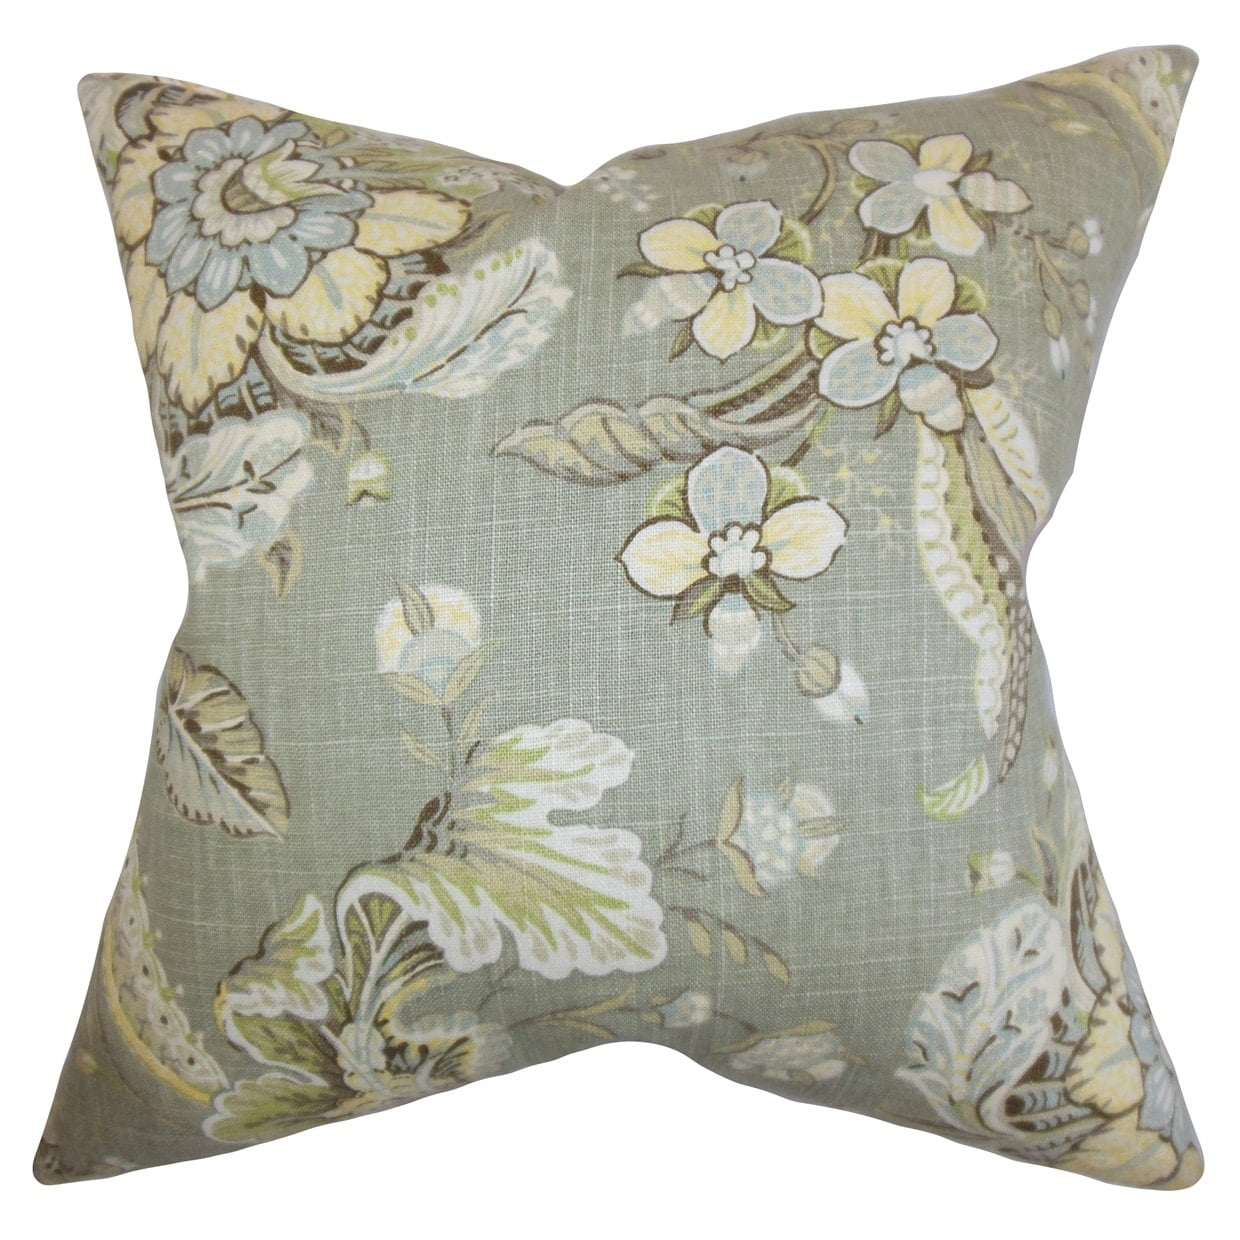 The Pillow Collection Kirrily Damask Throw Pillow Cover 